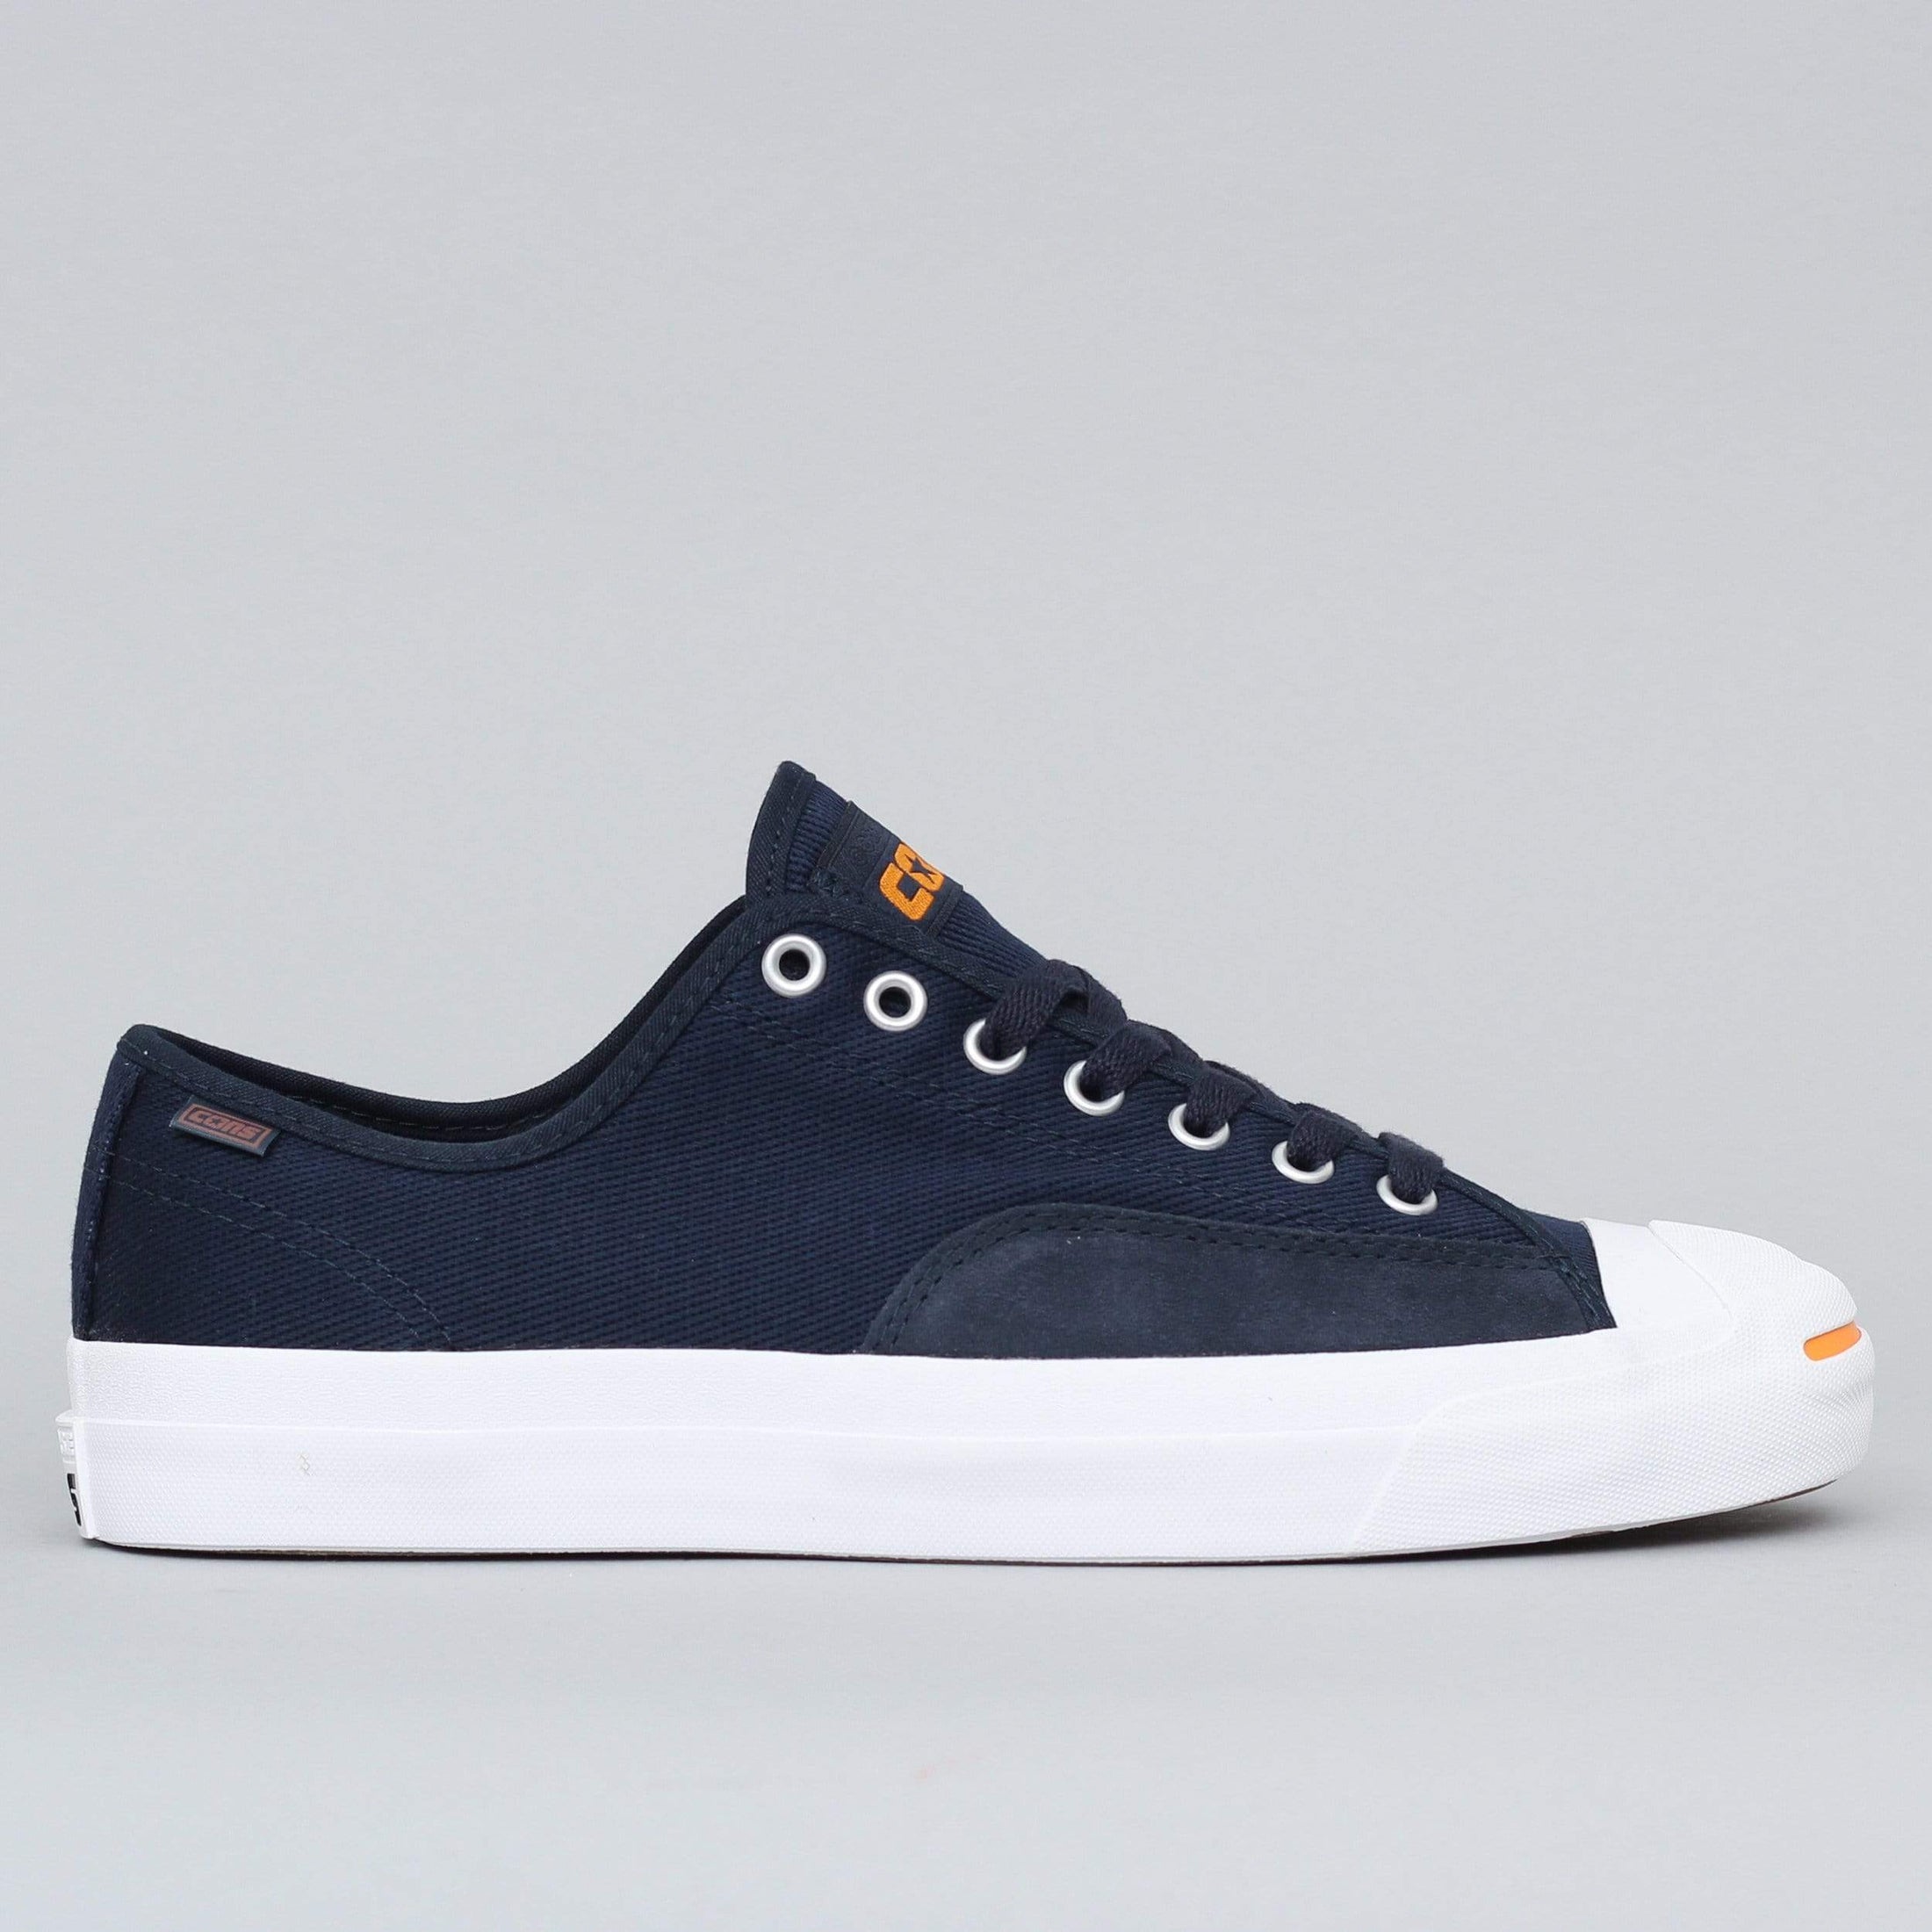 Converse Jack Purcell Pro OX Shoes Dark Obsidian / White